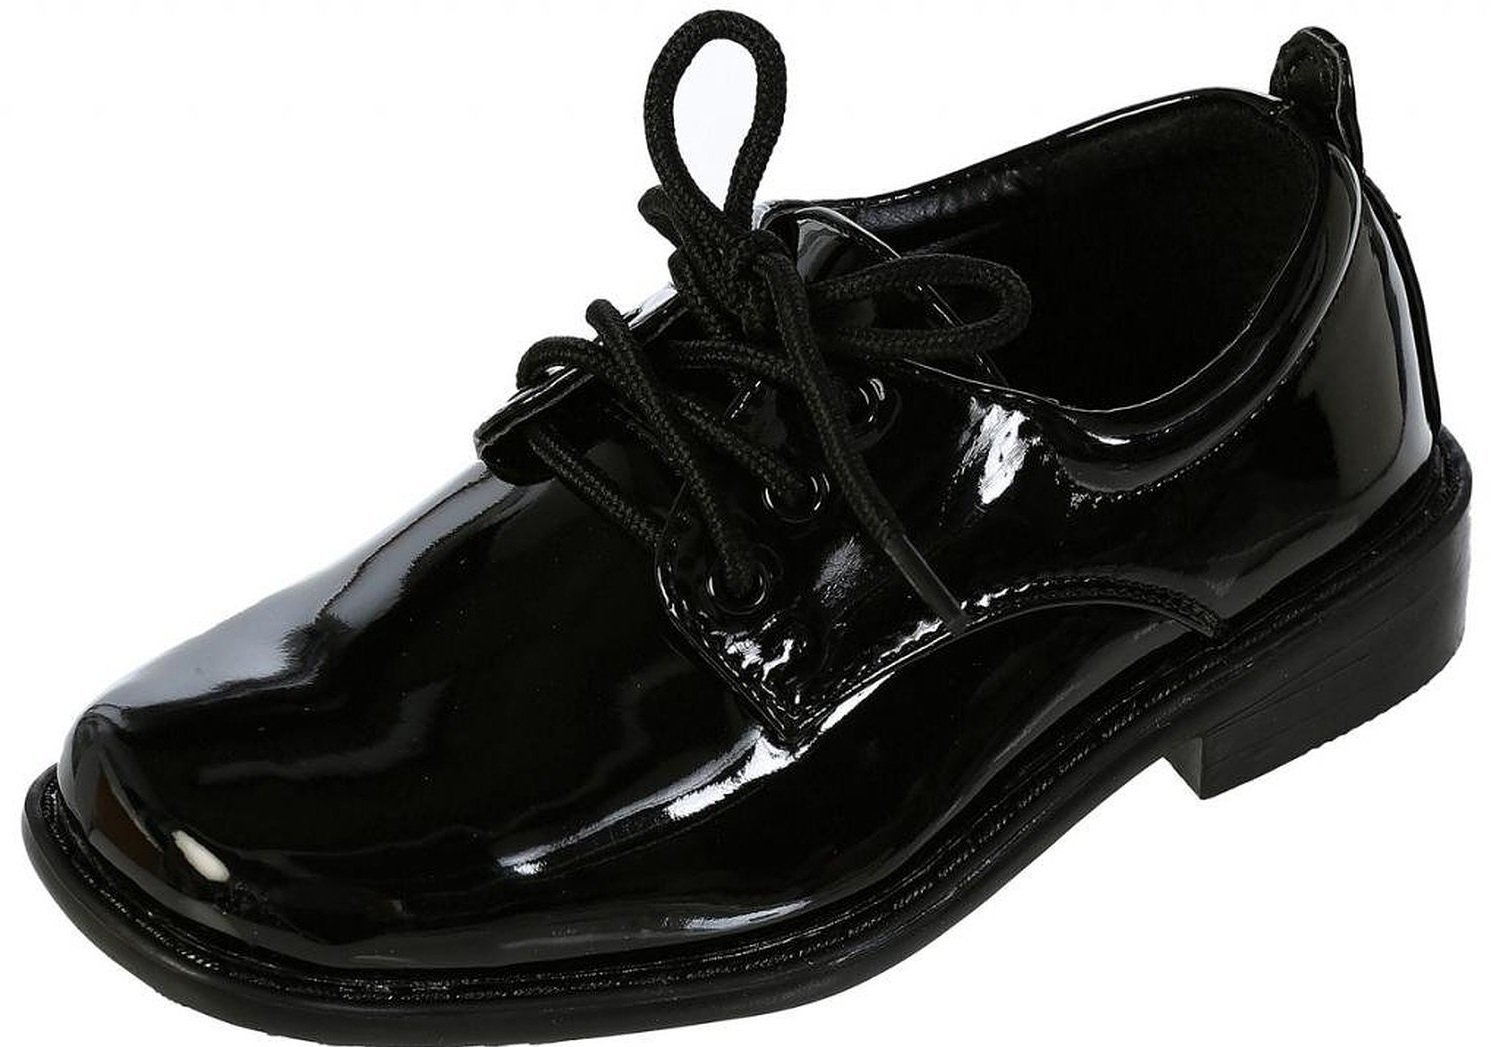 Boys Square Toe Lace Up Oxford Patent Dress Shoes - Available in White or Black